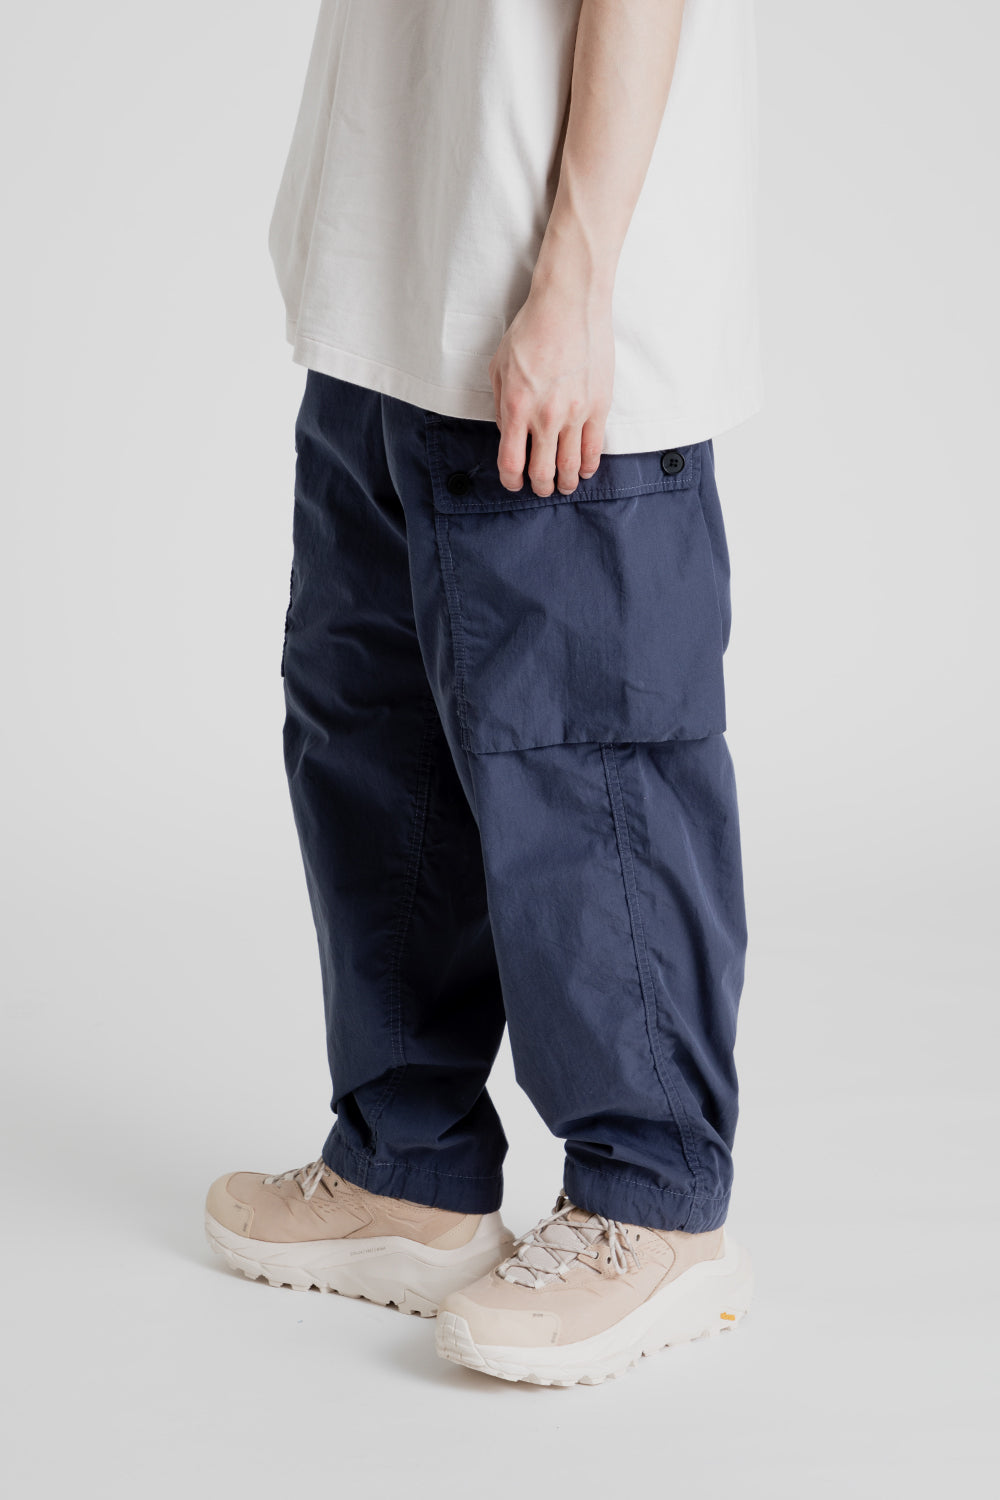 Men's Pants Cargo Tactical Men Cargo Pants with Pockets Big and